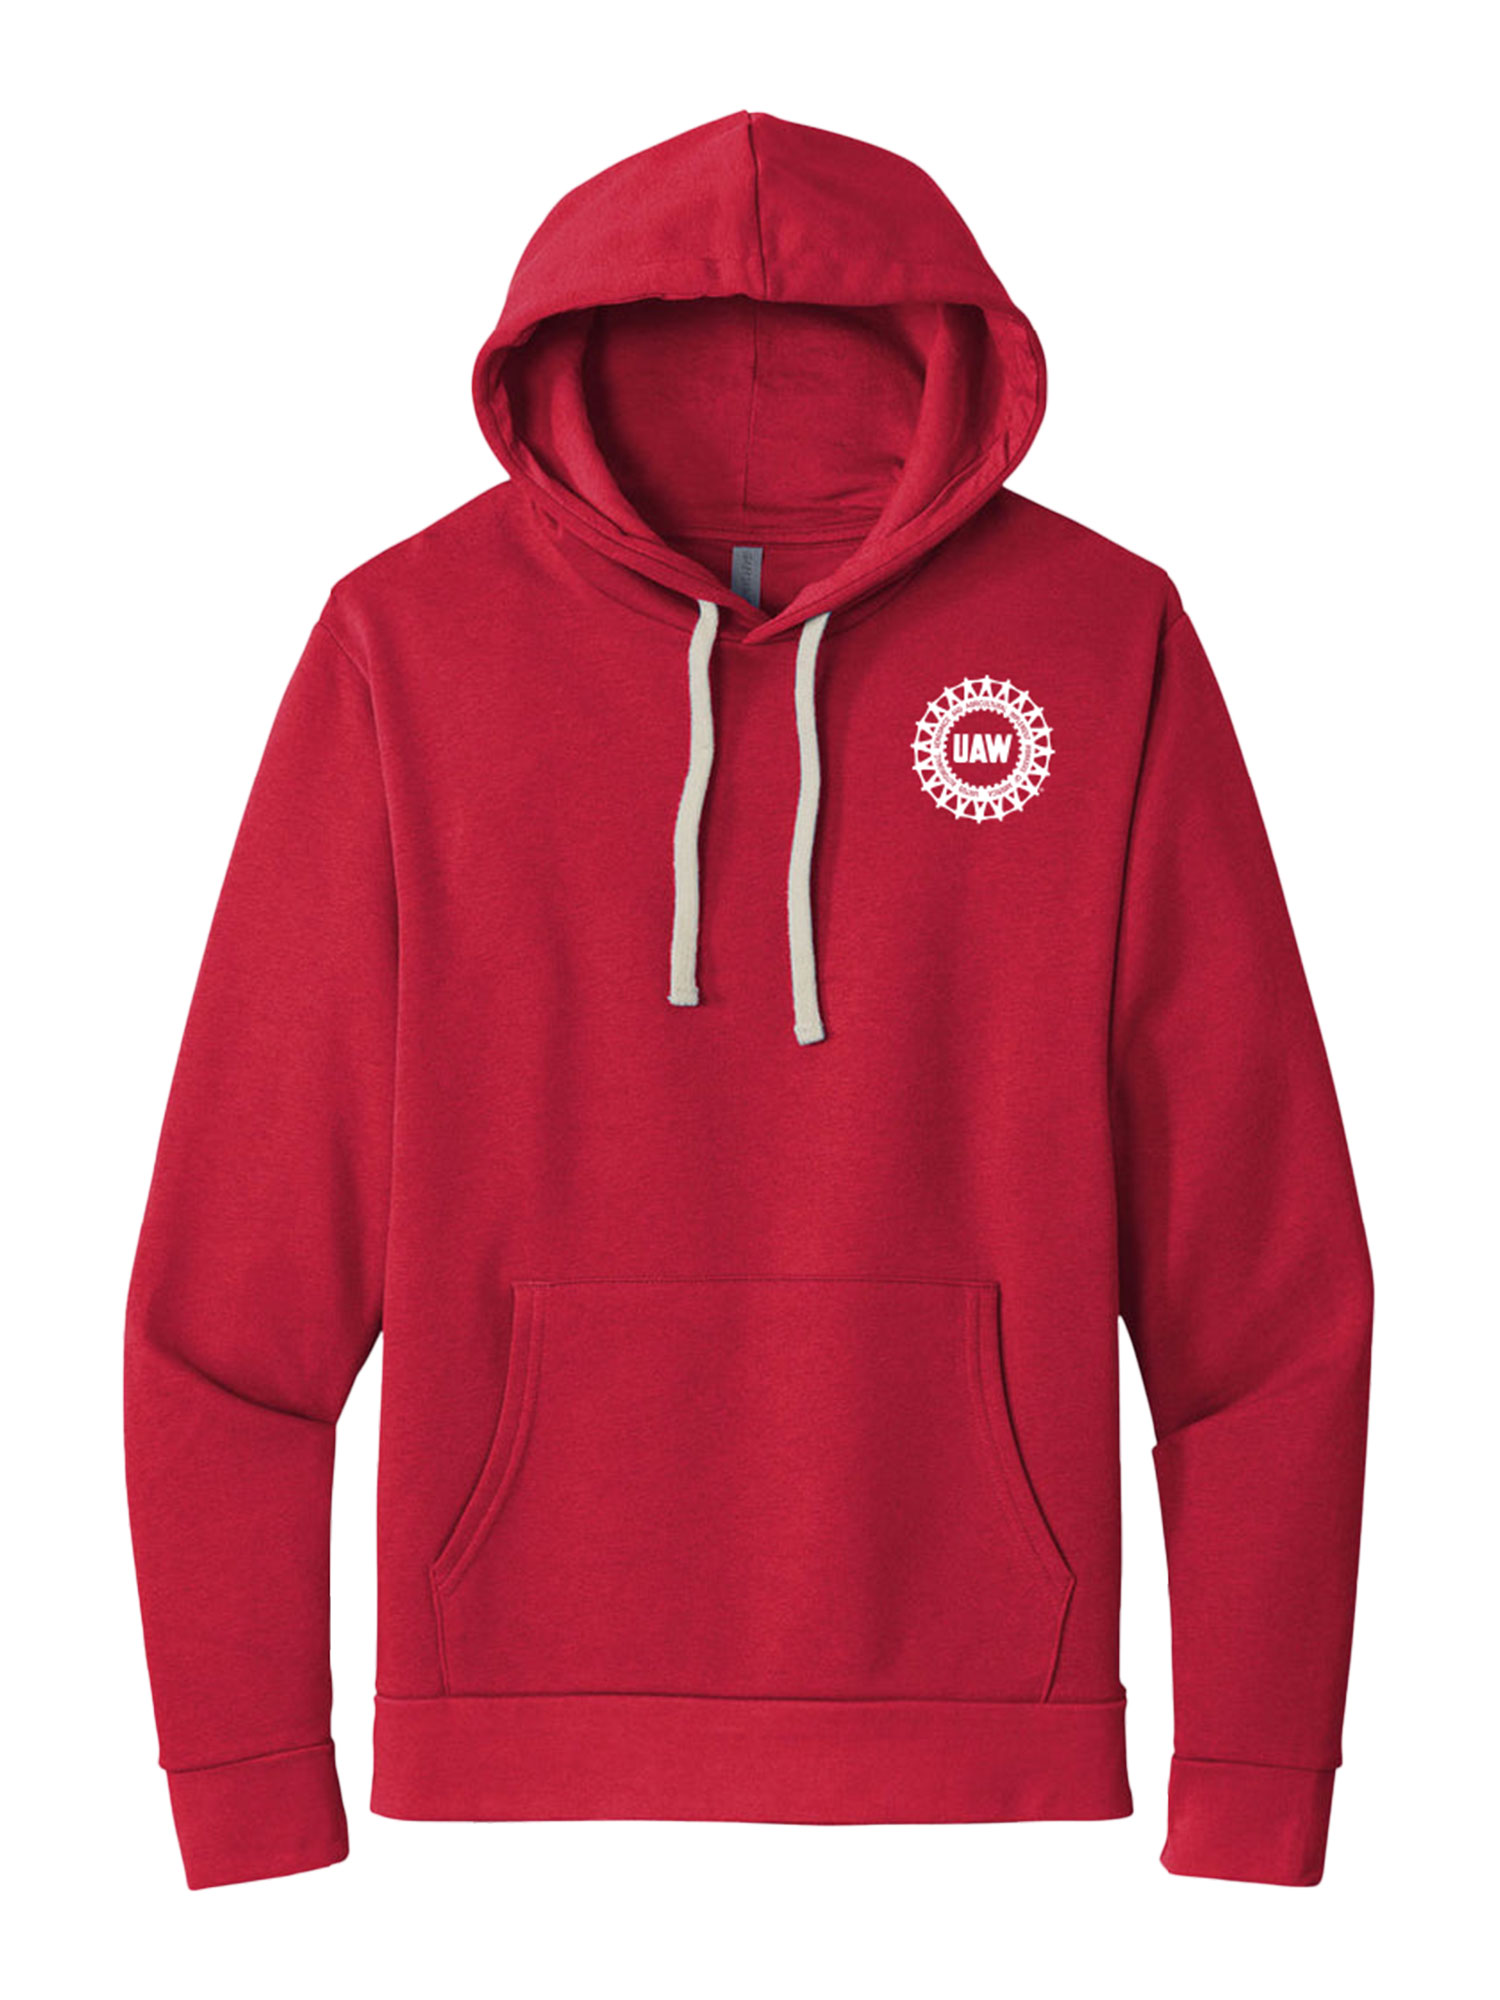 Hooded Pullover Sweatshirt - UAW Logo - Front